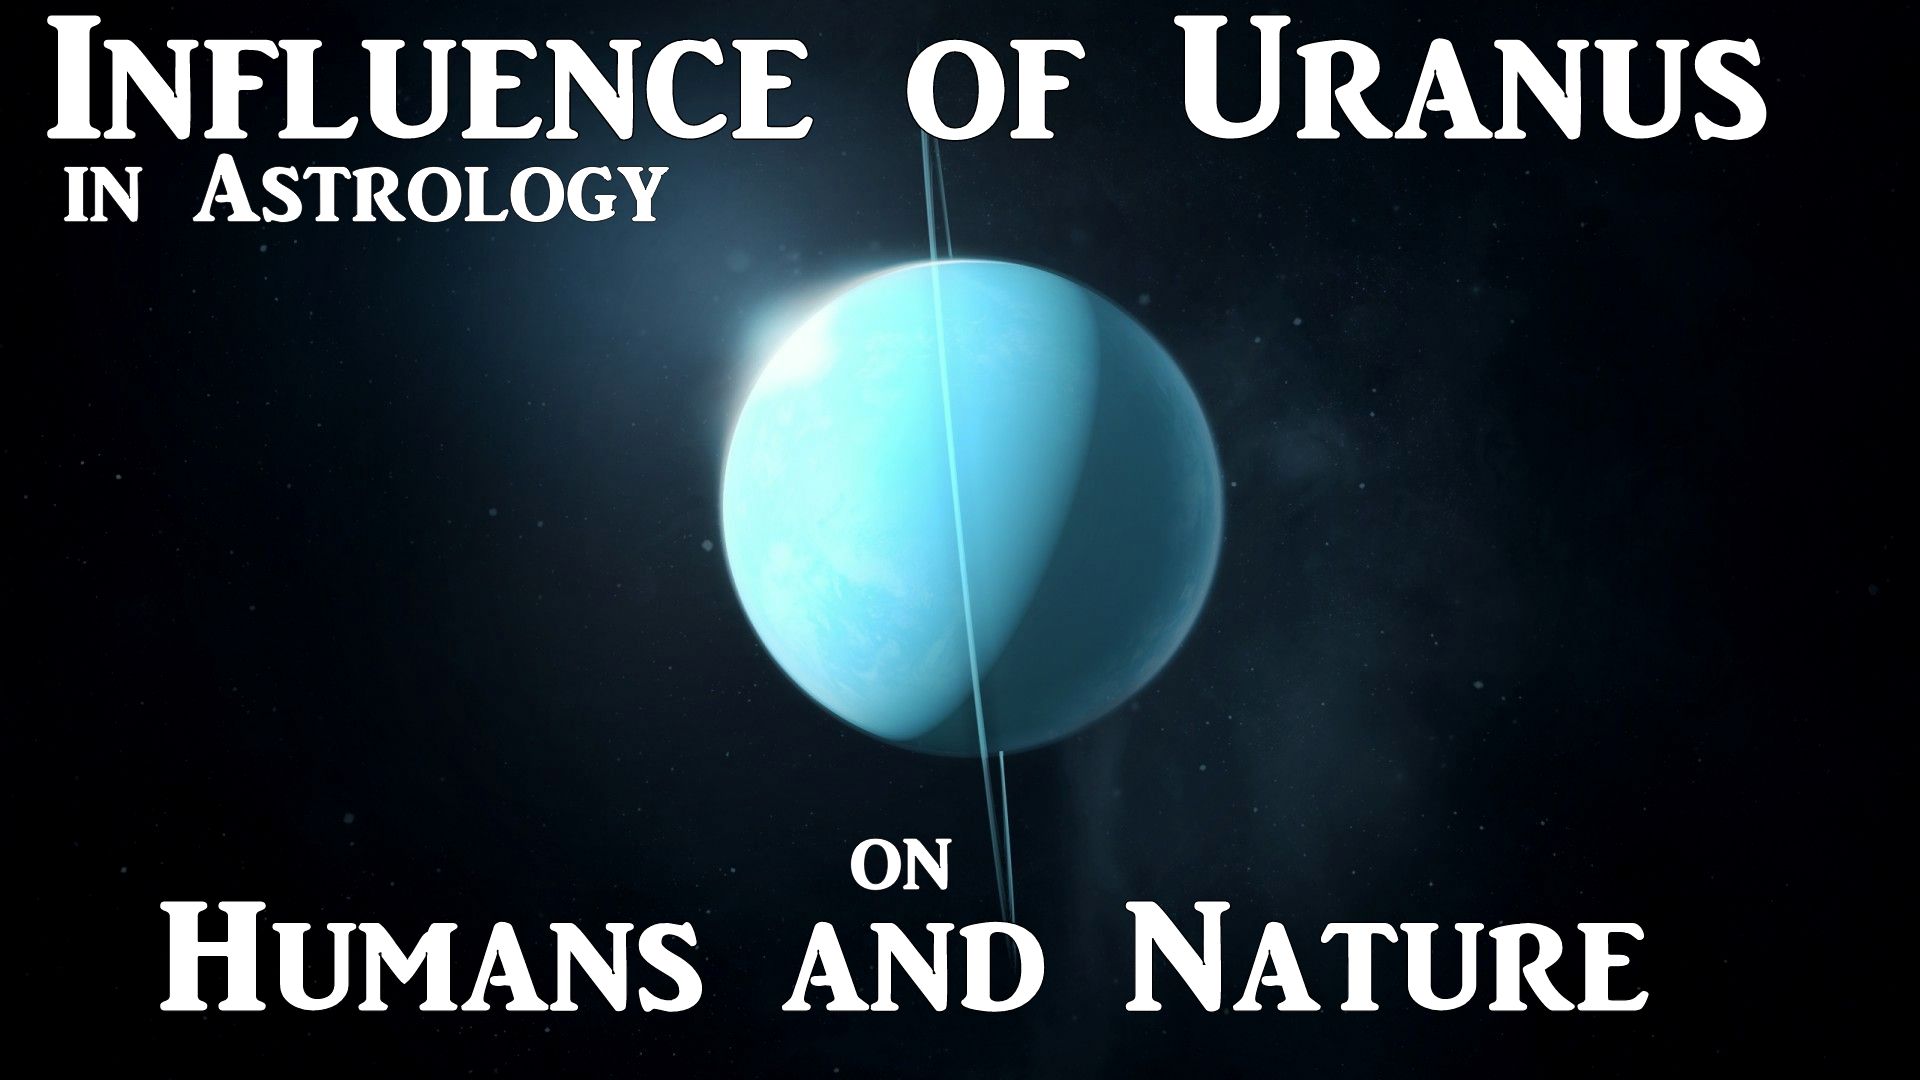 Influence of Uranus in Astrology Influence of Uranus in astrology on Humans and Nature